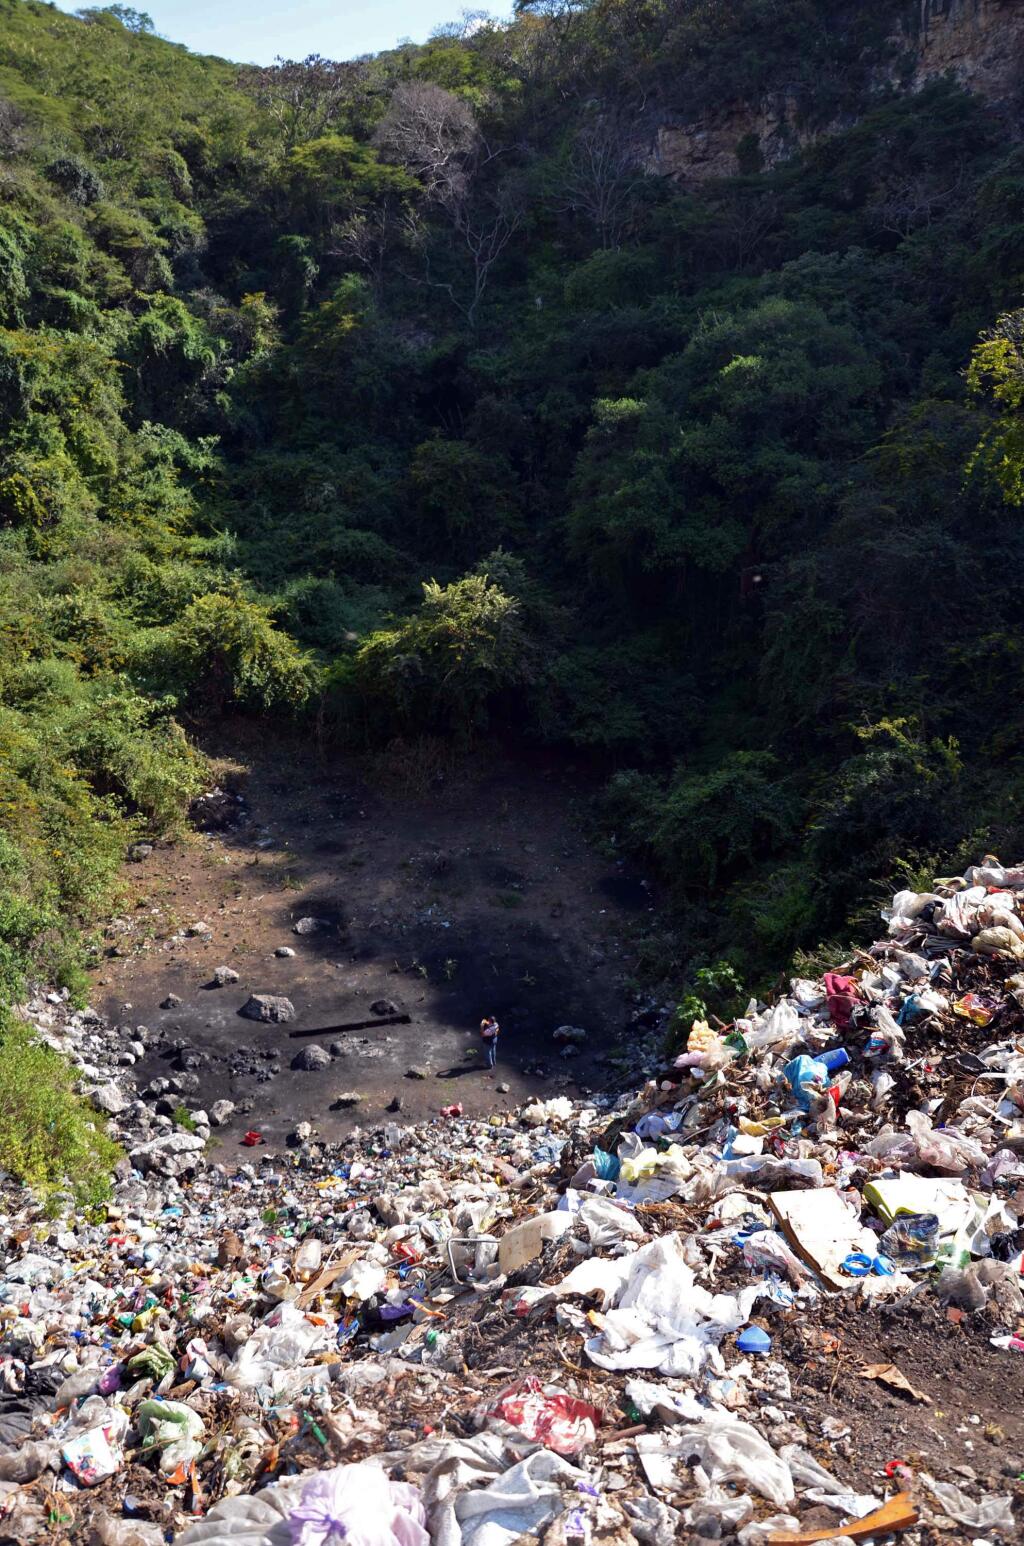 This is the site near the town of Cocula, Mexico, pictured on Saturday, Nov. 8, 2014, where according to investigators, drug gang members made 43 teachers college students disappear, piling their bodies like cord wood on a pyre that burned for 15 hours and then wading into the ashes to pulverize, bag and dispose of remaining teeth and bones. In a somber presentation, Attorney General Jesus Murillo Karam laid out on Friday what investigators think happened to the students who have not been seen since being attacked by police Sept. 26 in the southern city of Iguala. (AP Photo/Alejandrino Gonzalez)